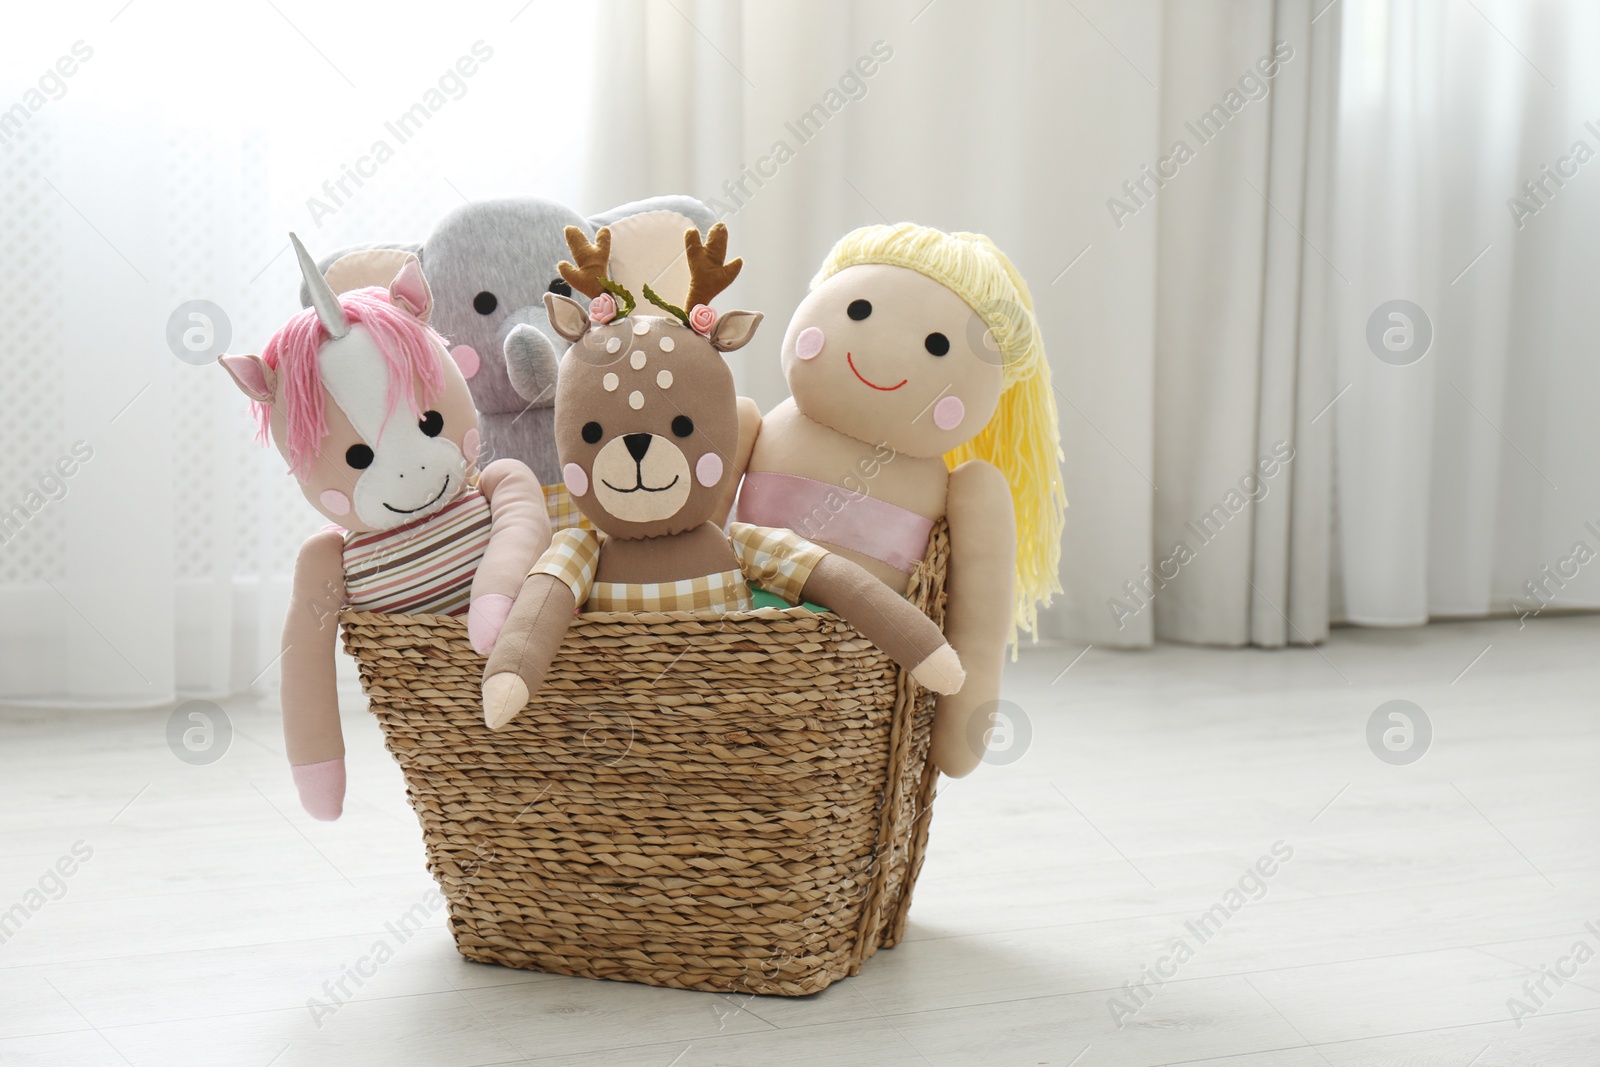 Photo of Funny toys in basket on floor. Decor for children's room interior